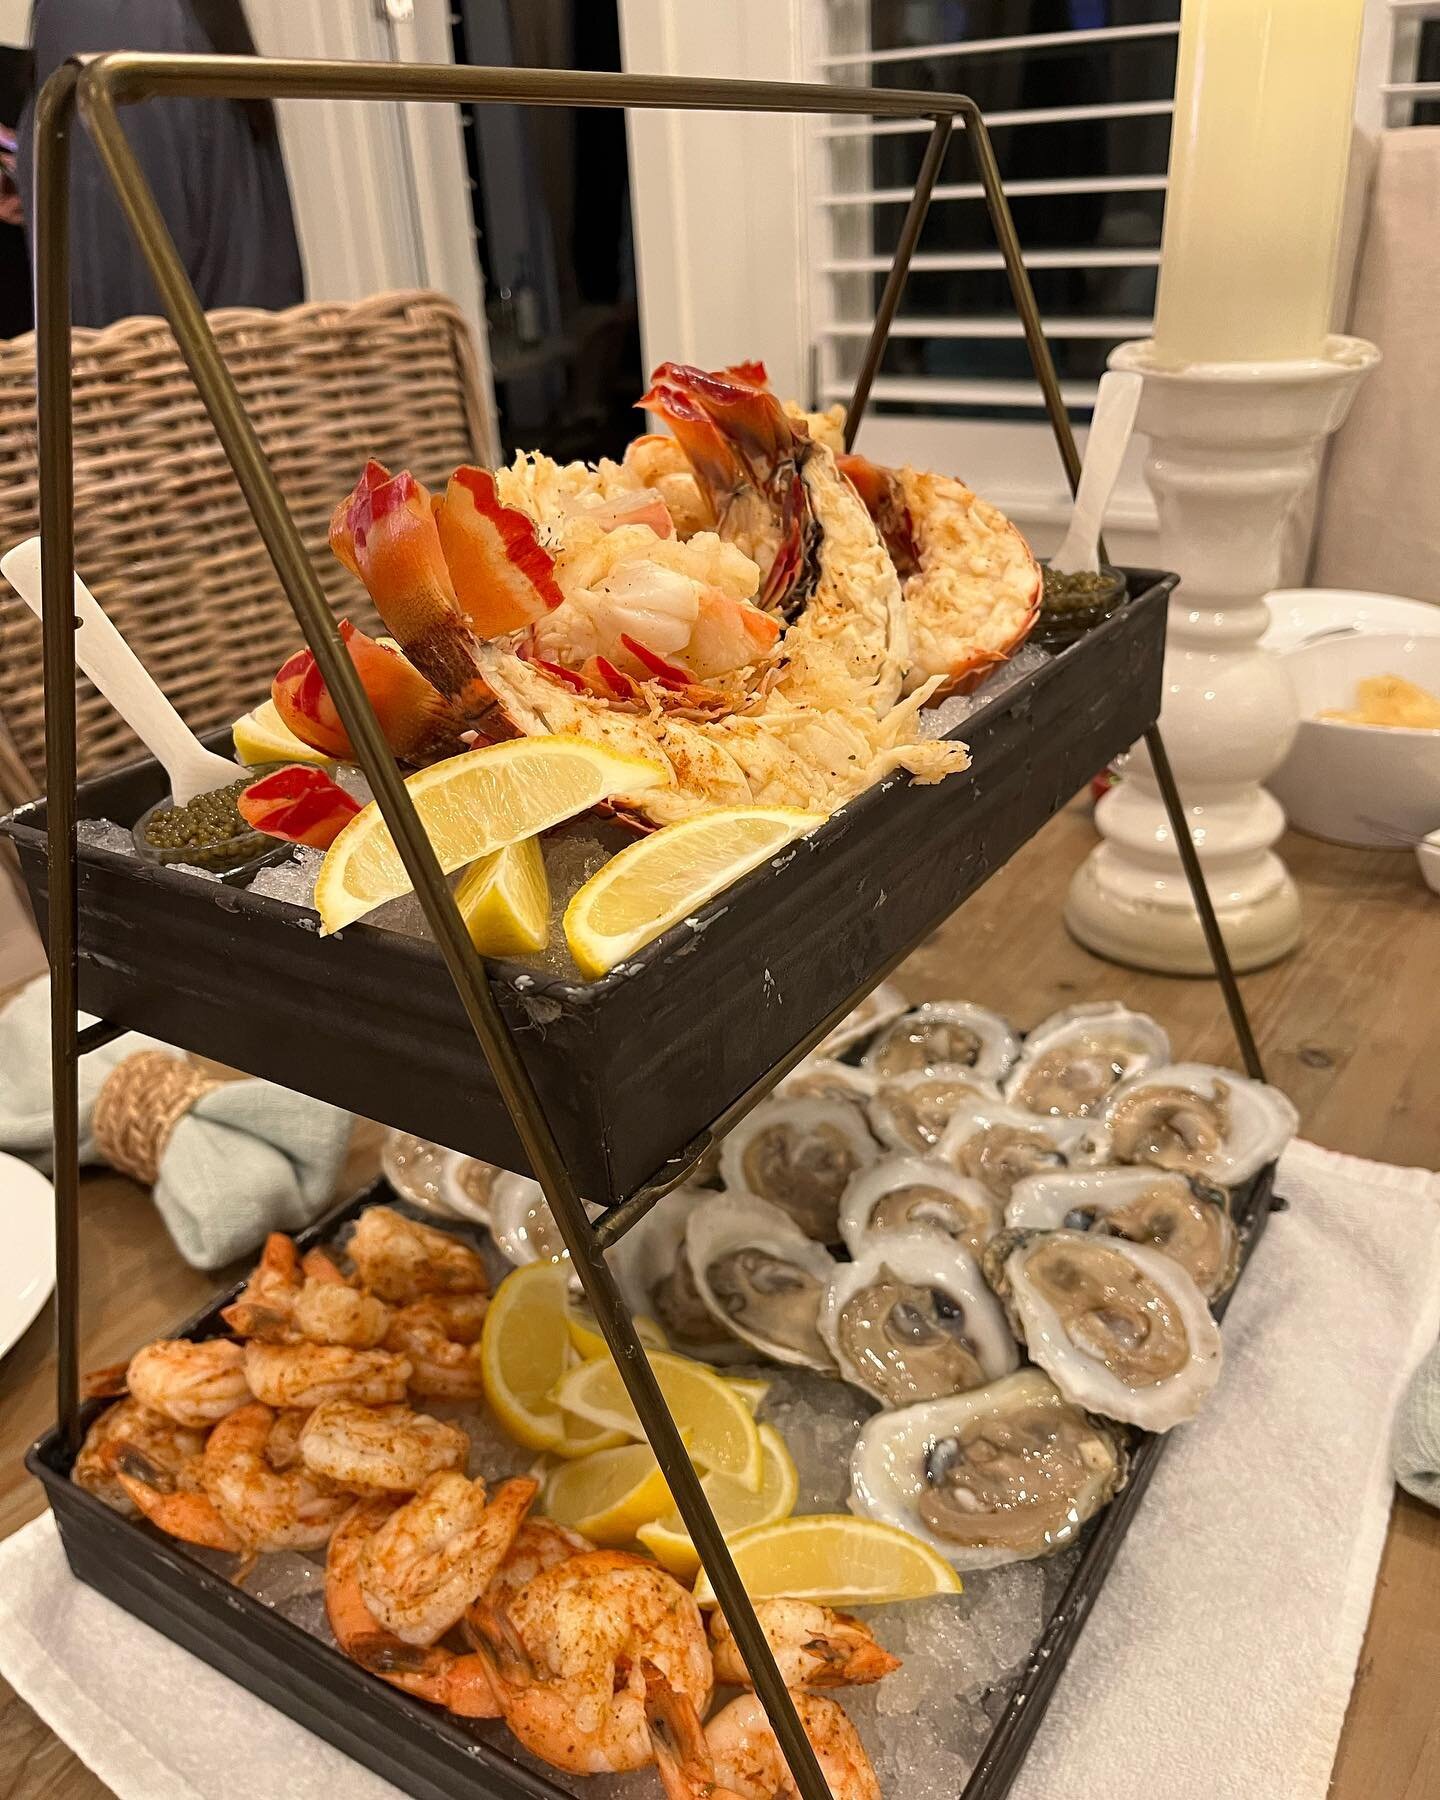 Had some fun in Watersound Origins with some of my favorites ☺️. Seafood tower with osetra caviar, east coast oysters, local shrimp, &amp; FL lobster tails. Seared diver scallops topped with @regalisfoods foie gras &amp; local bacon over white aspara